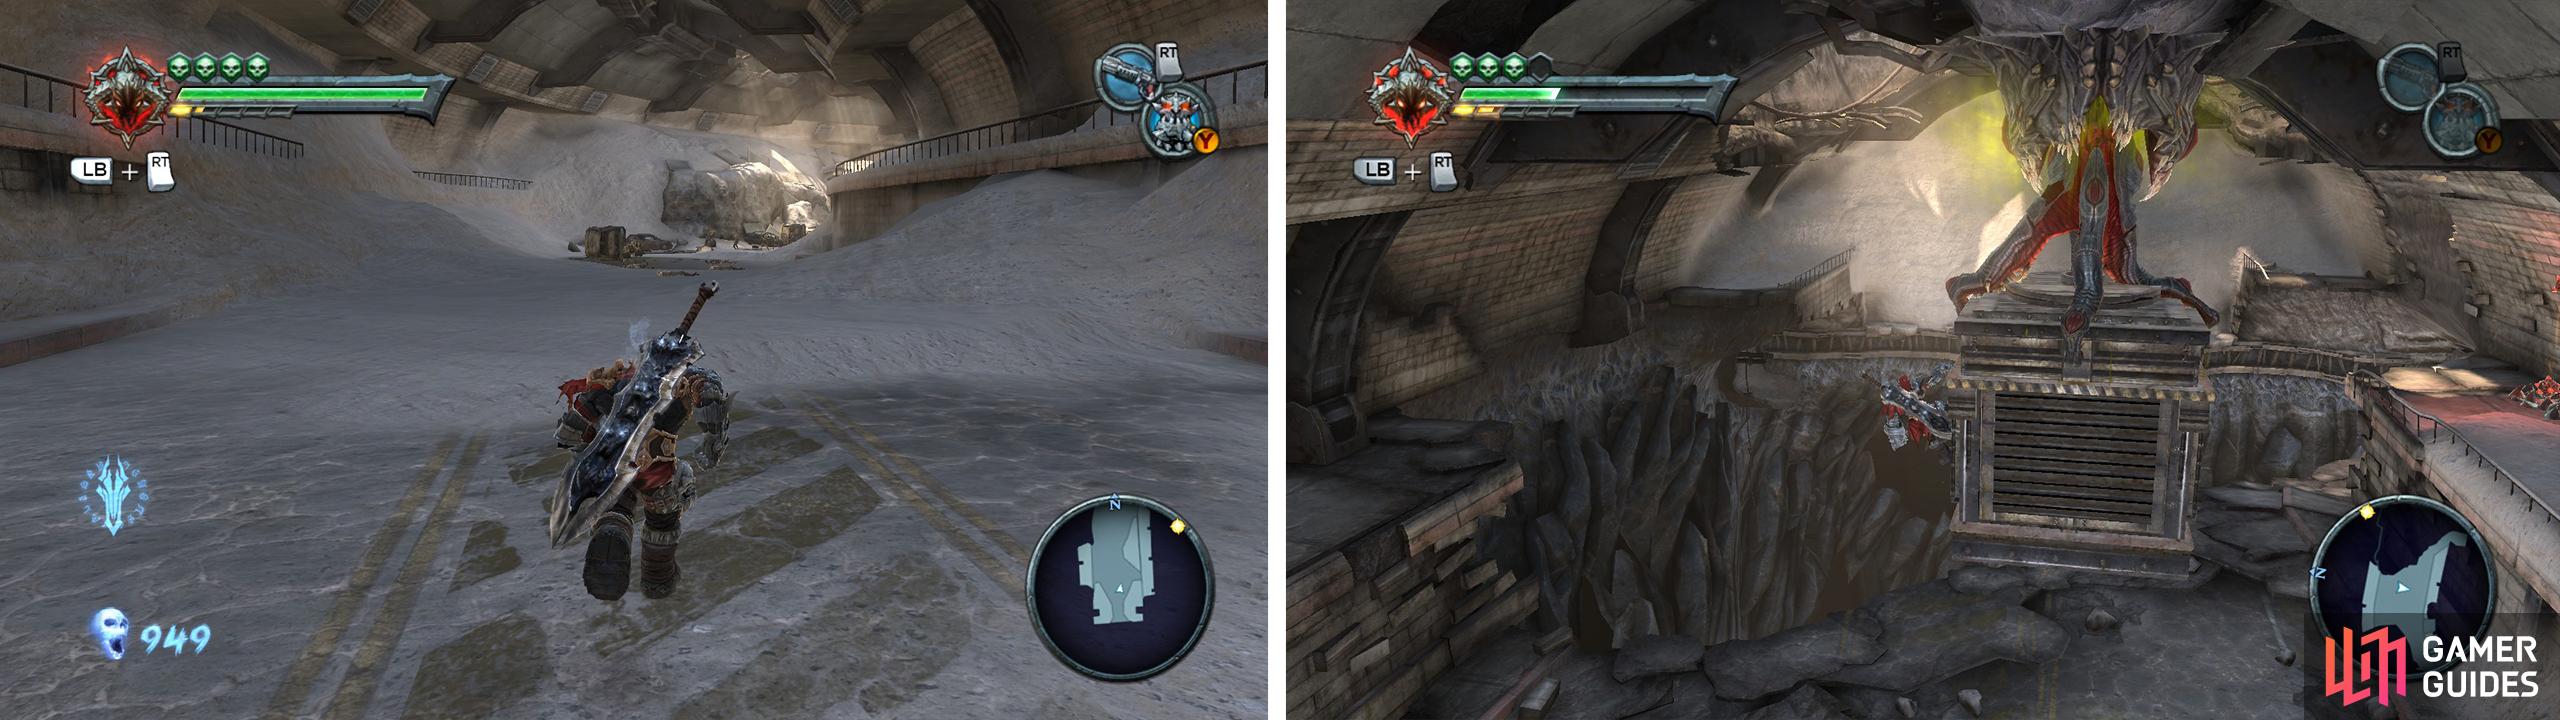 Enter the tunnel (left) and use the Demonic Plant and crate (right) to access the left hand balcony for an Enhancement.